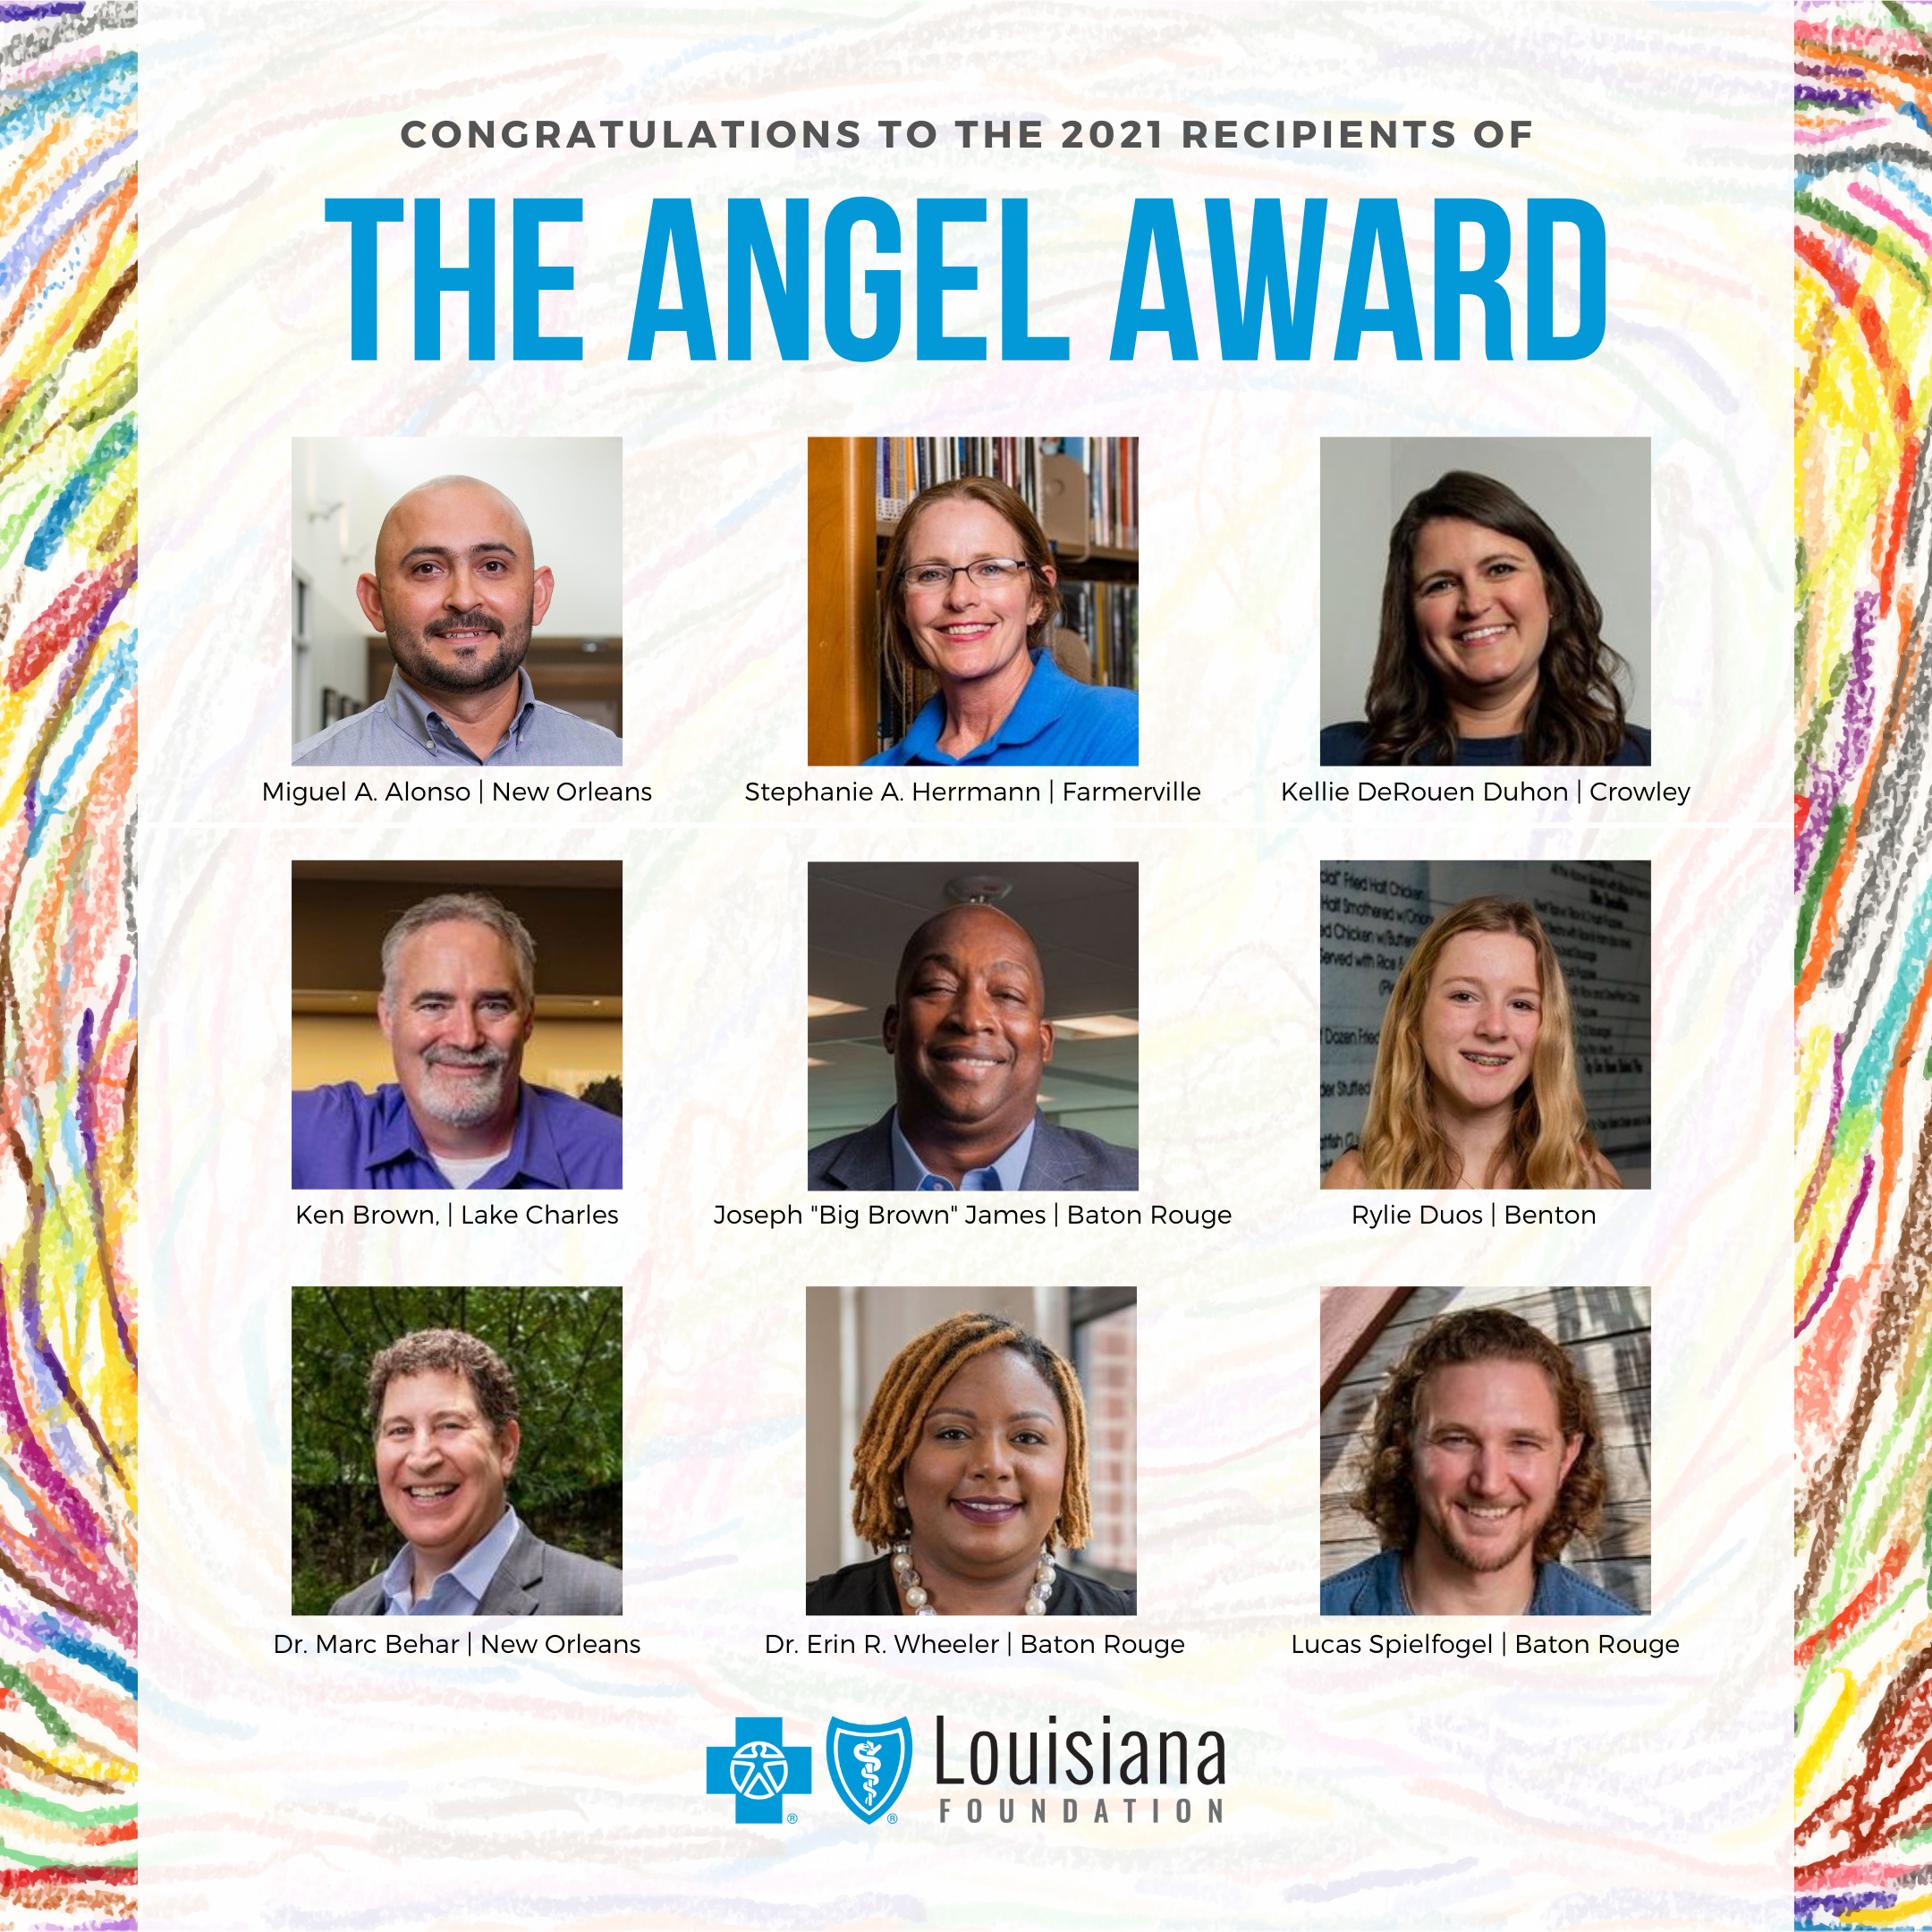 This image shows a collage of nine people who have won the 2021 Angel Award